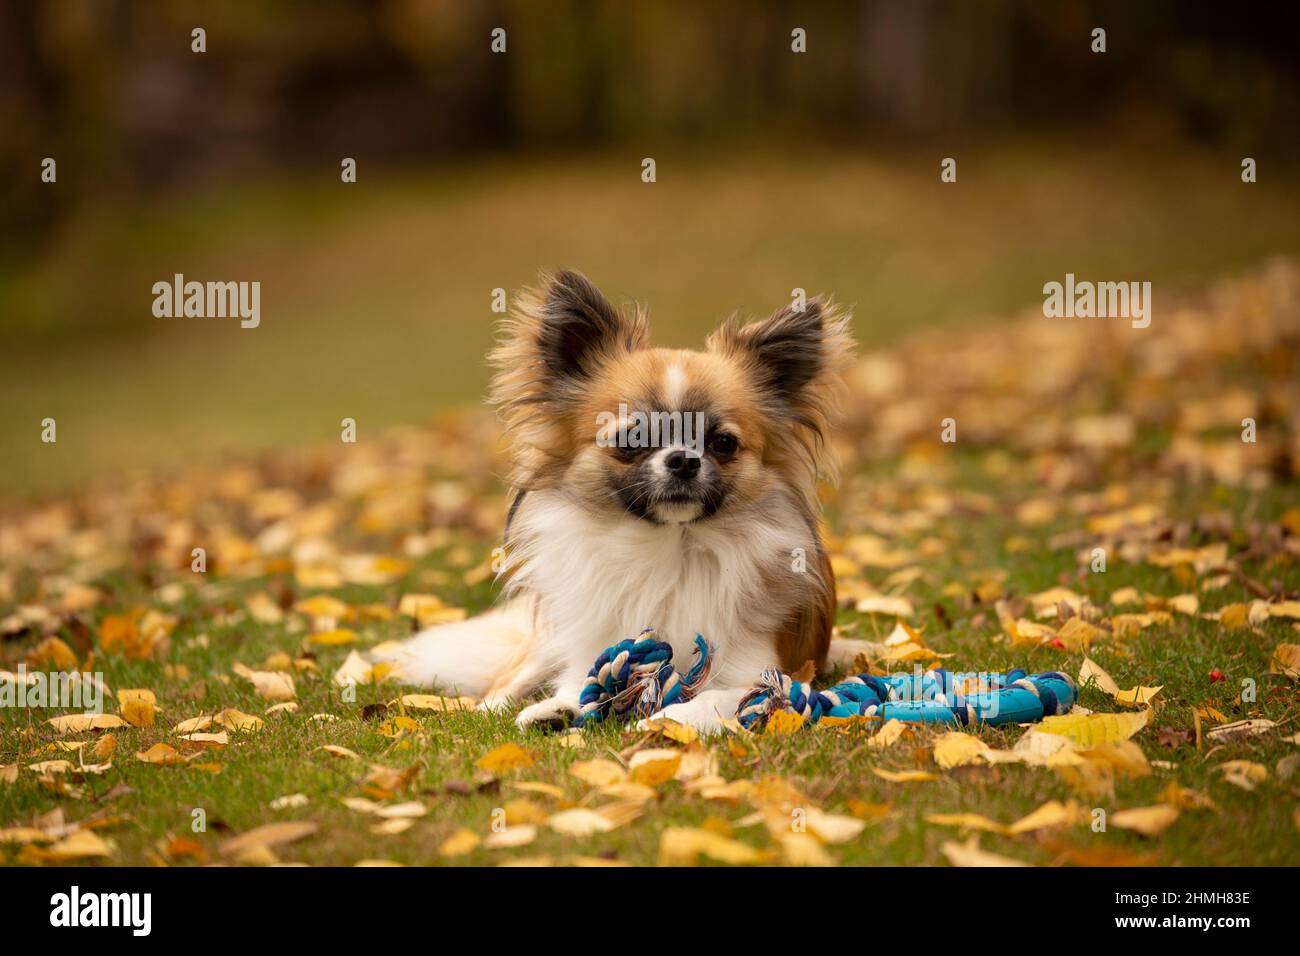 Long-haired Chihuahua lying on the ground in the autumn garden, Finland Stock Photo